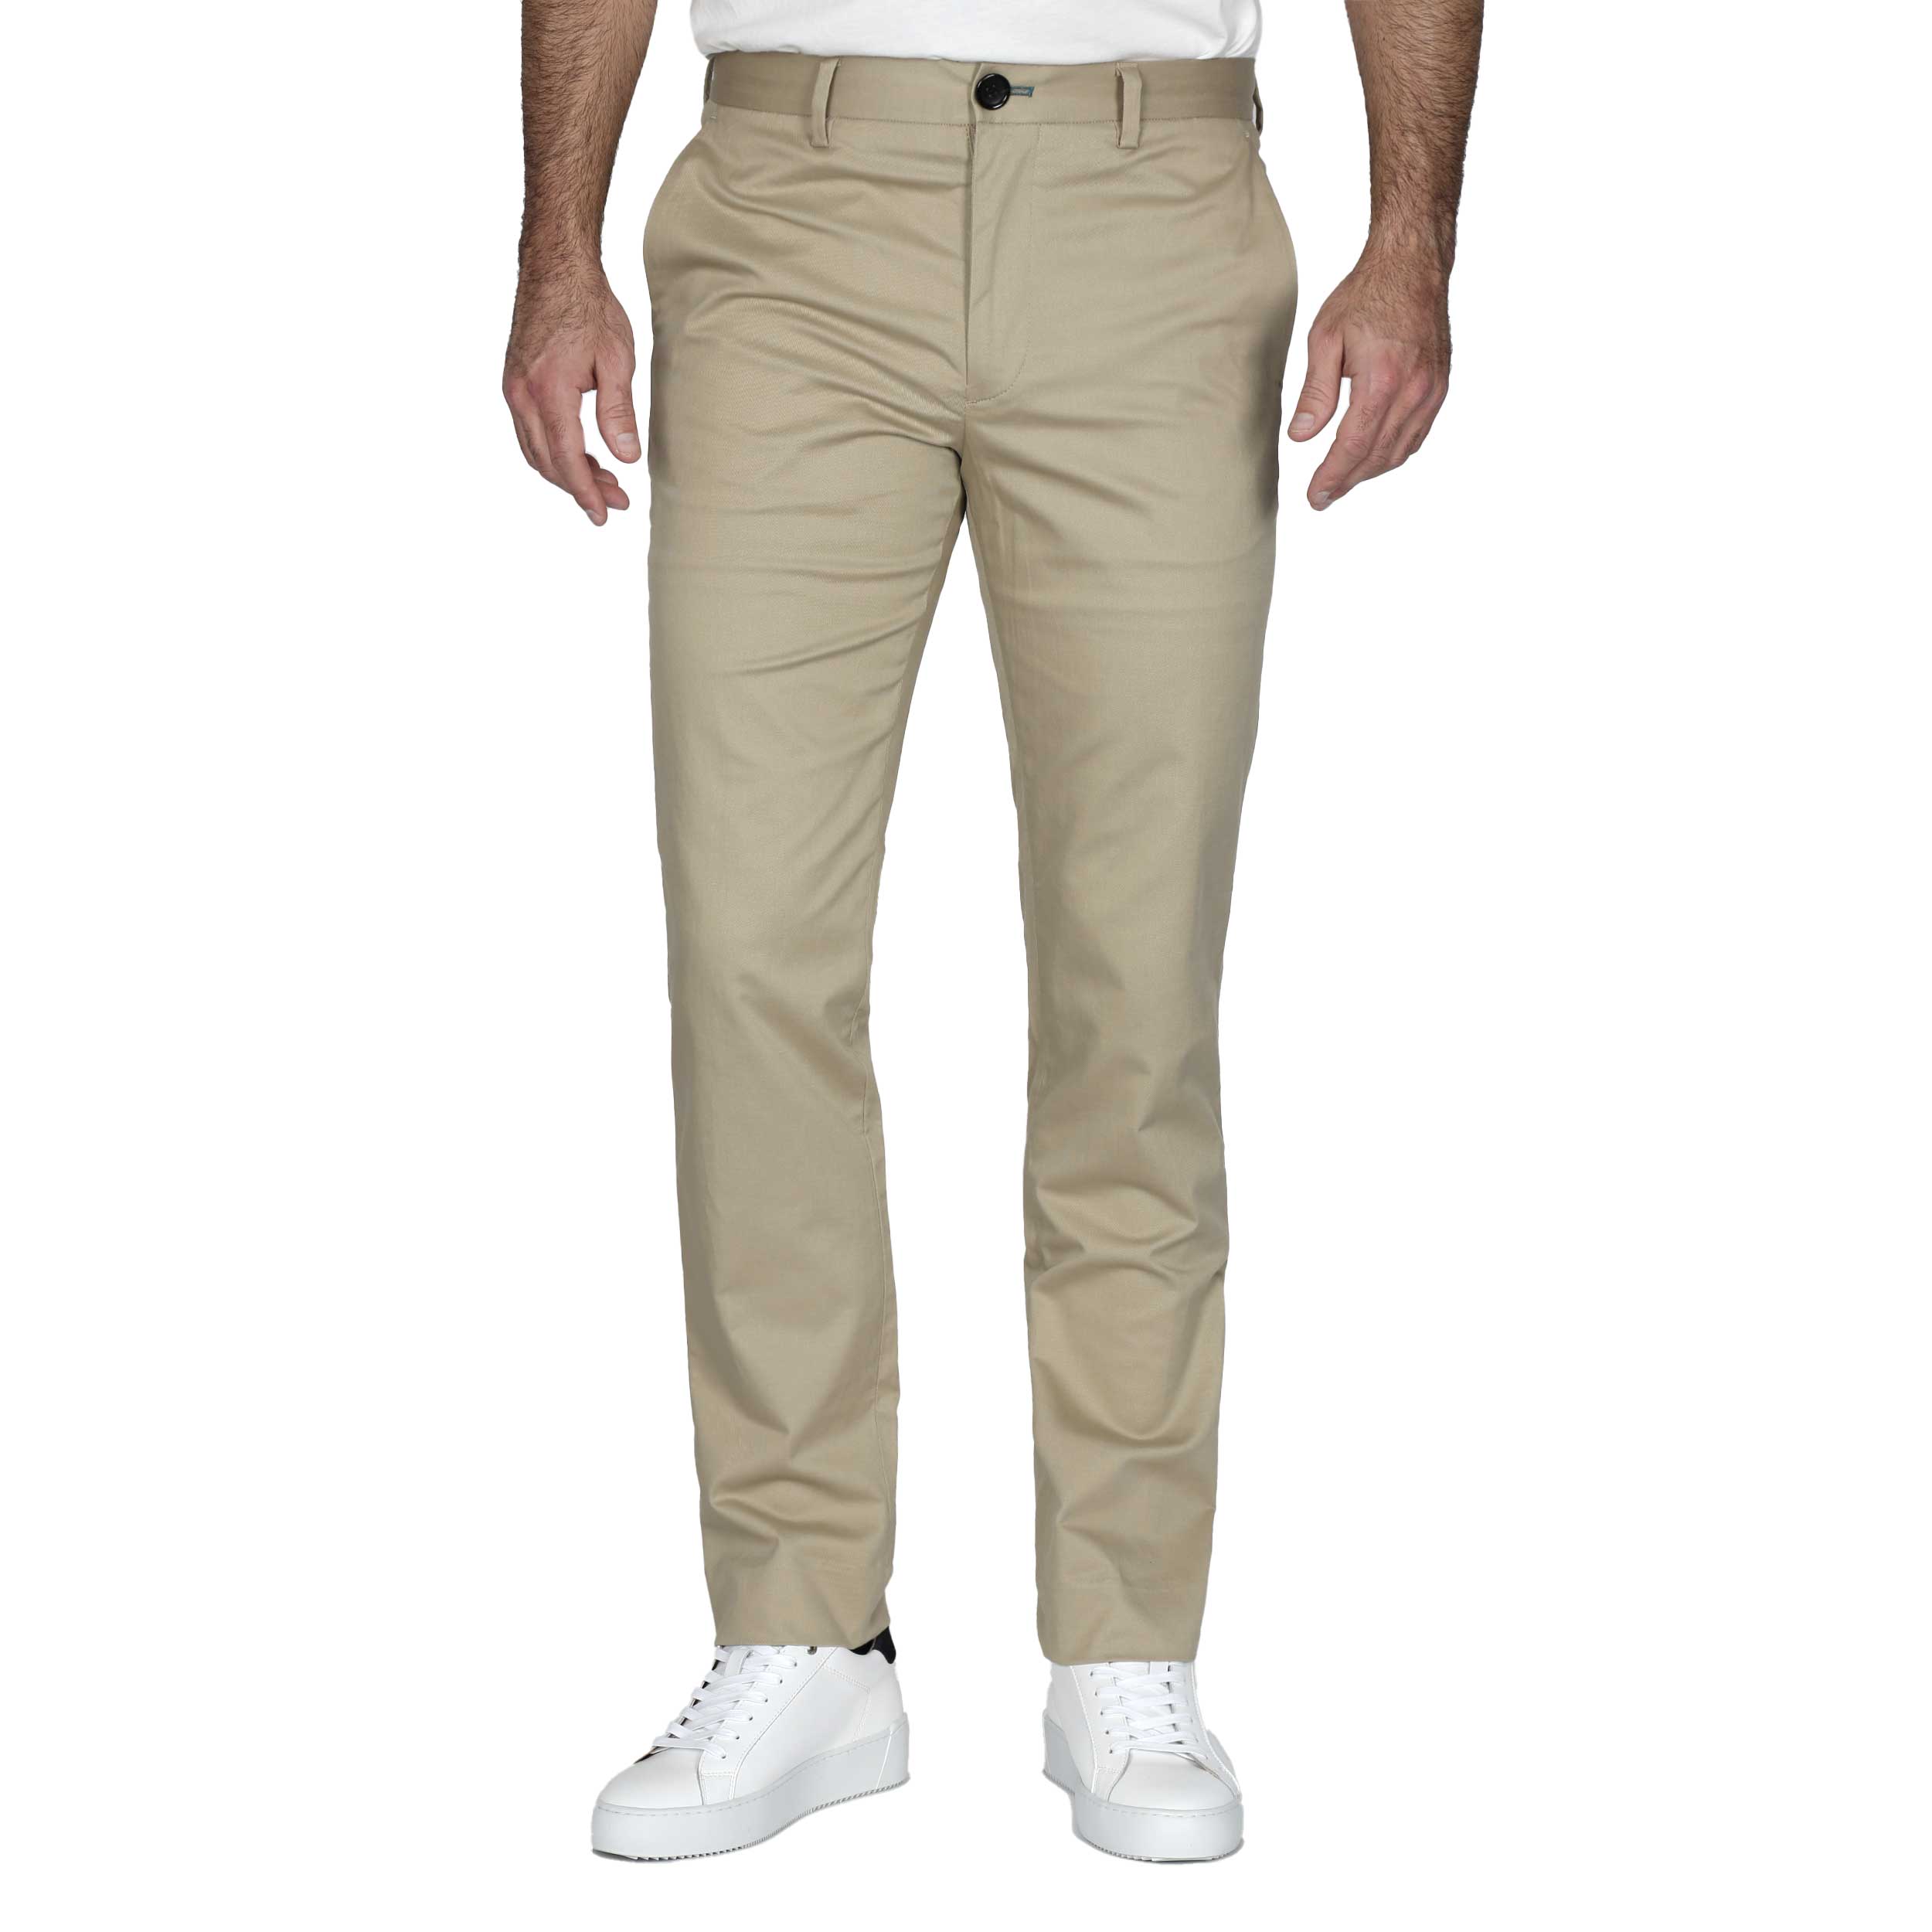 Paul Smith Mid Fit Chino in Light Beige